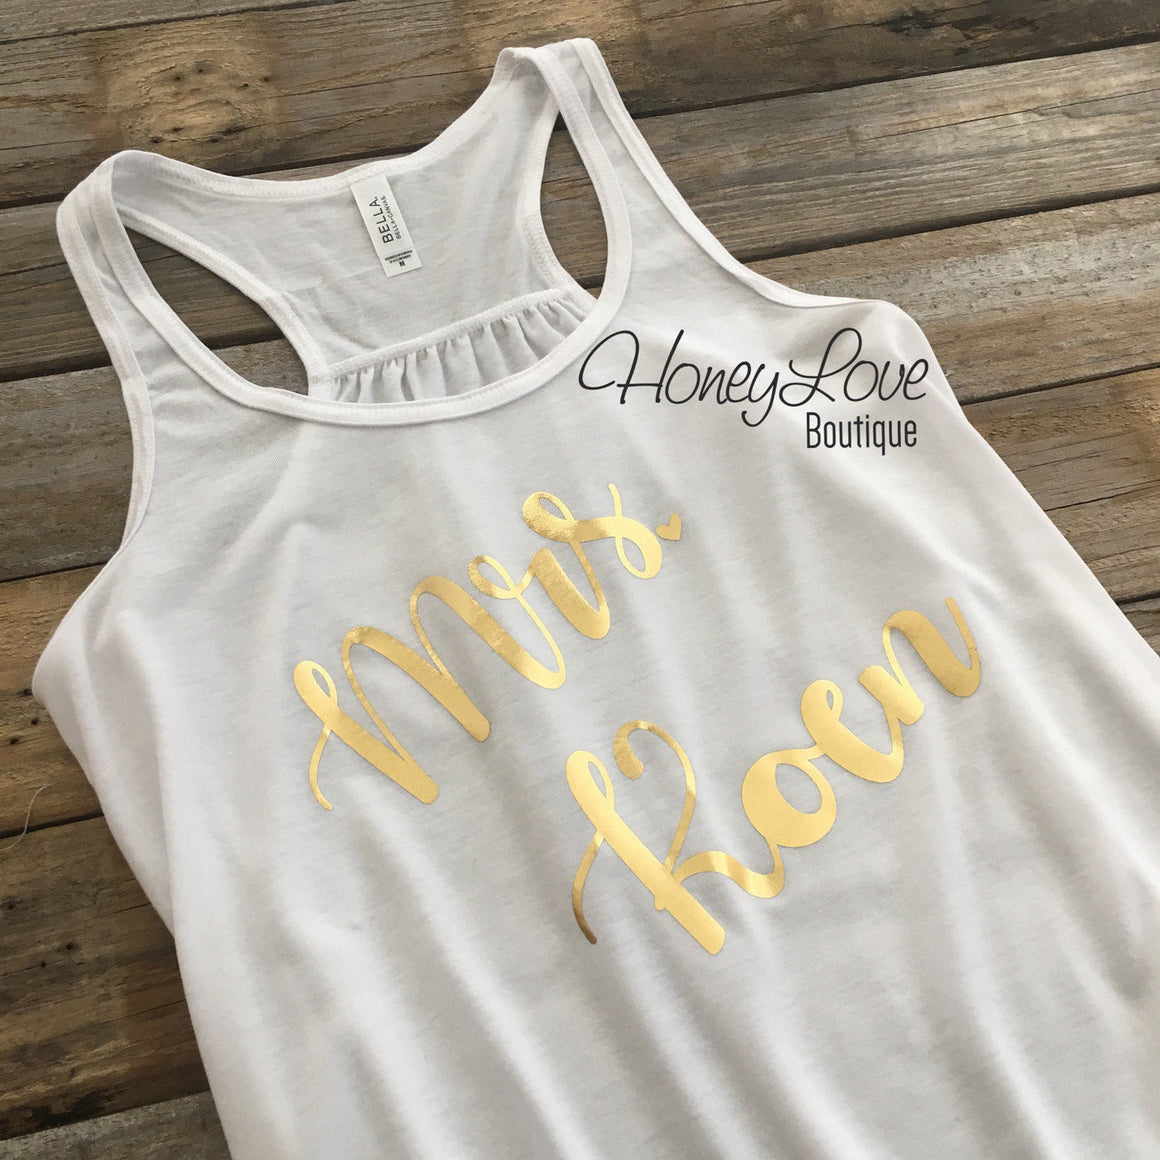 PERSONALIZED Mrs. Last Name flowy tank - Gold foil - HoneyLoveBoutique